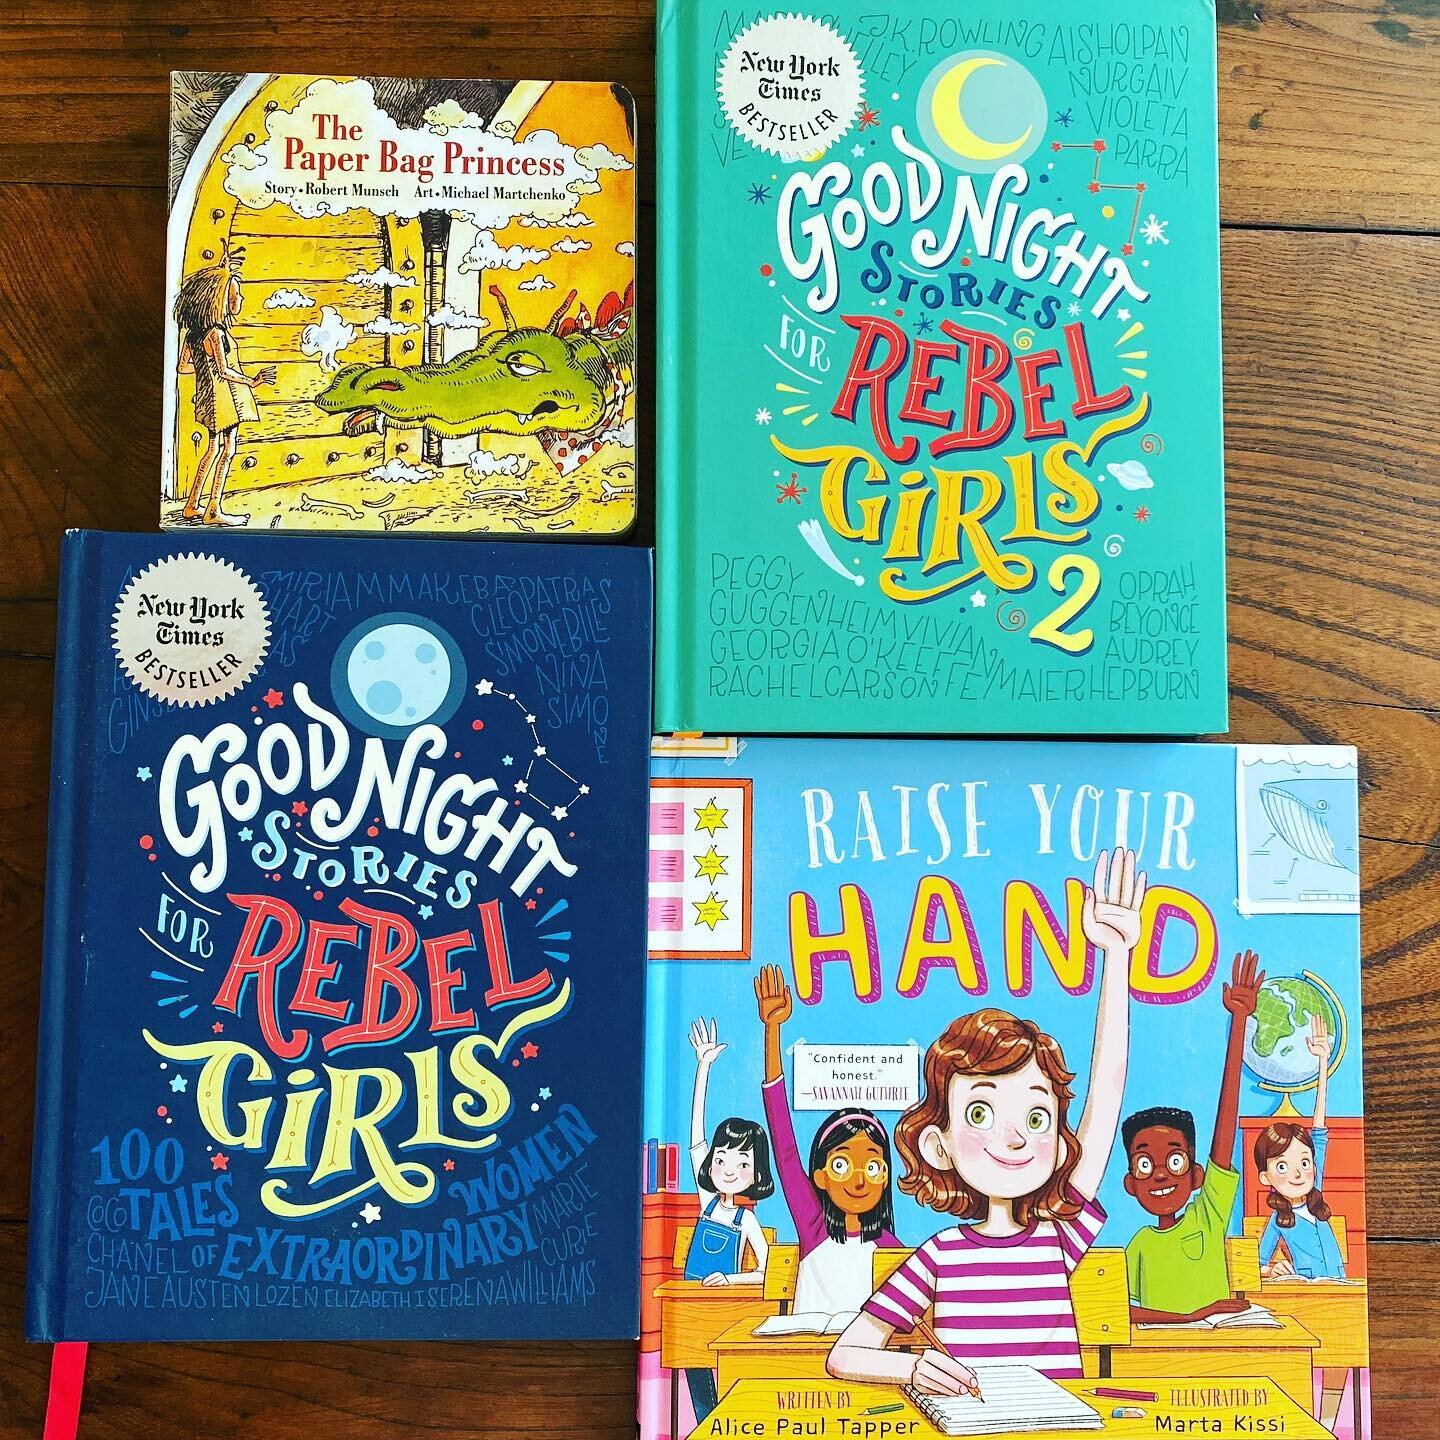 Love these stories about strong girls and women! Recommend them for any parent. Please share other ideas in the comments. @rebelgirlsbook #strongwomen